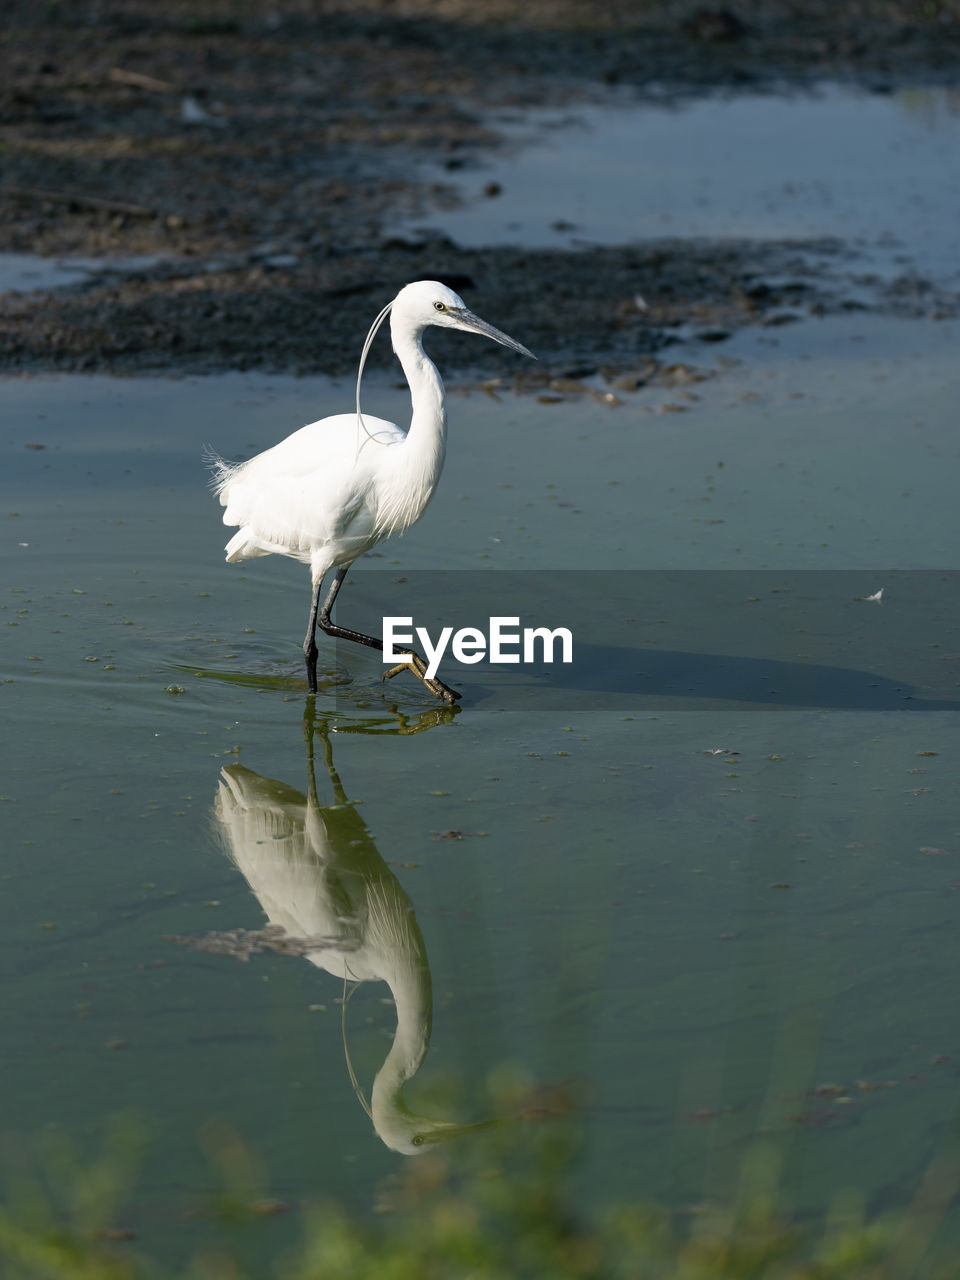 The image of a little egret reflected in the water of a pond early in the morning. vertical image